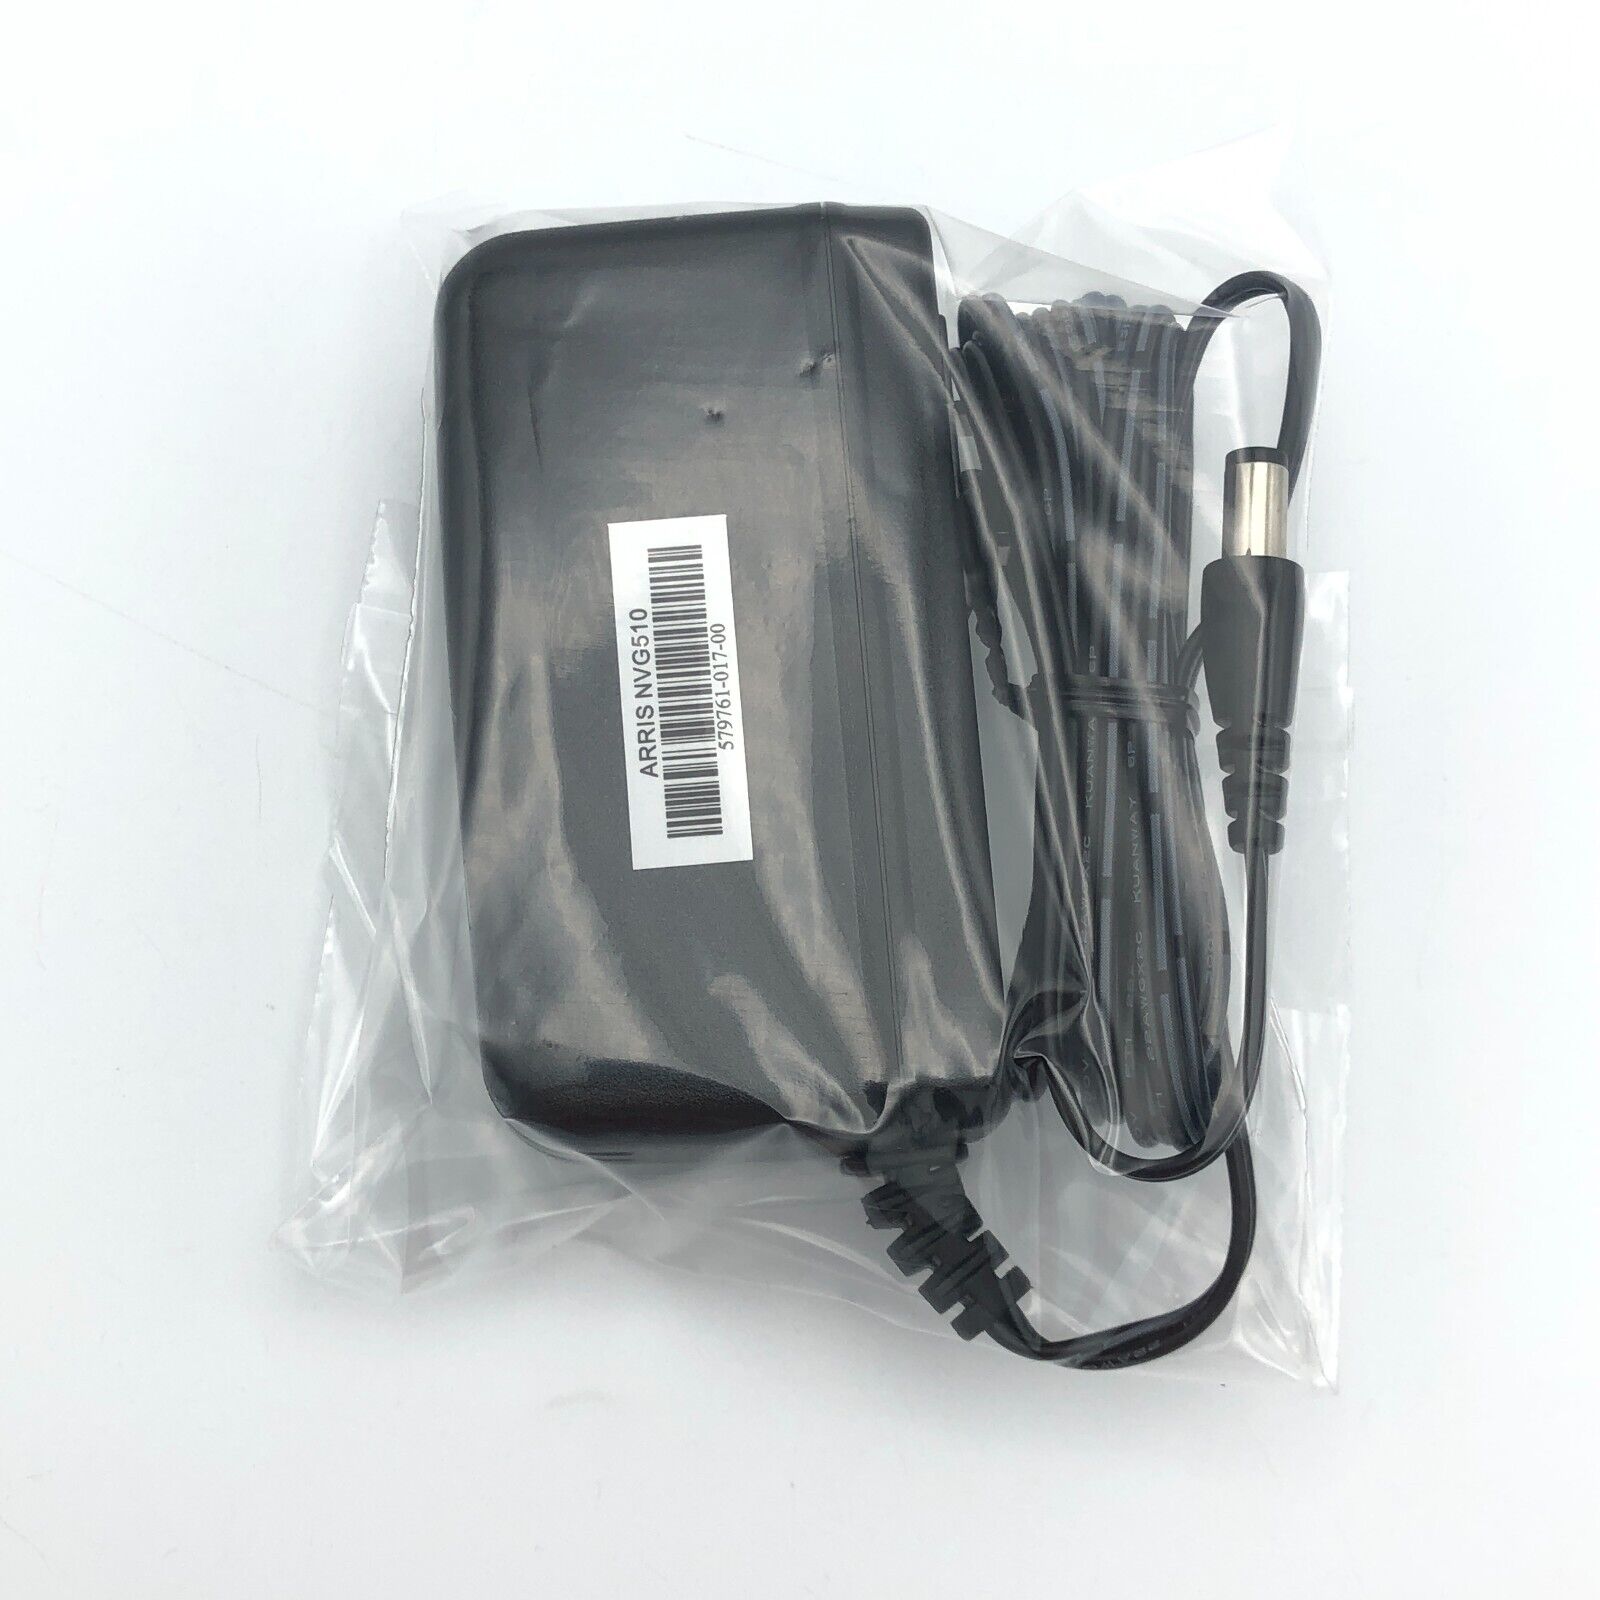 Genuine Arris AC Adapter Power Supply for Sennheiser XSW 1-835 Microphone System Compatible Brand For Sennheiser Color